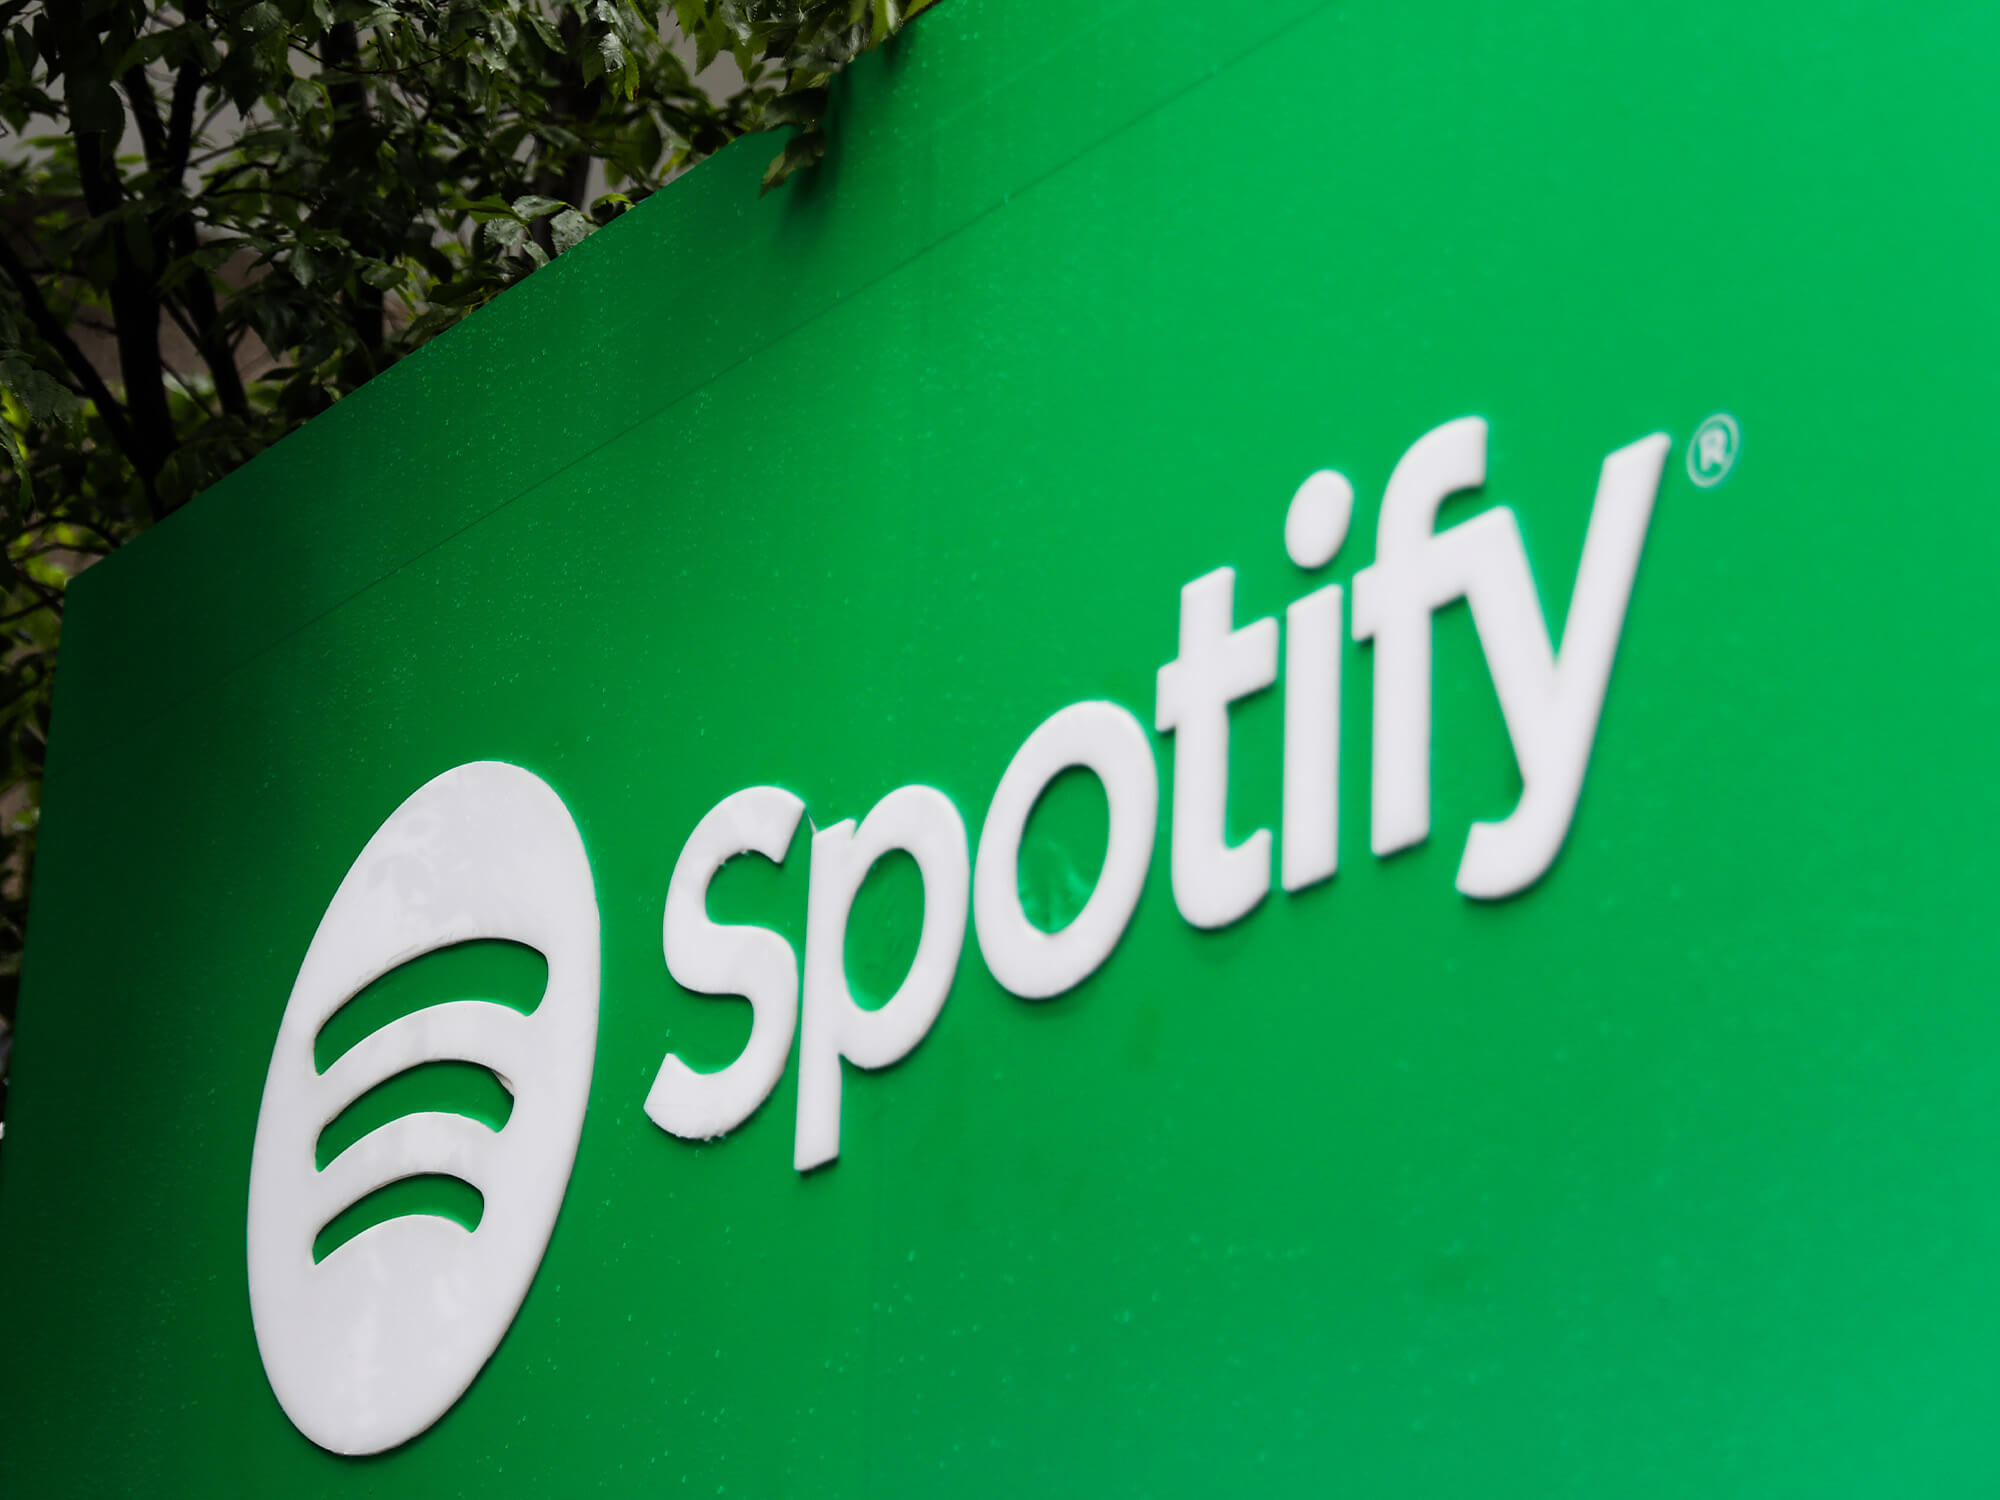 Spotify logo in white text on a green wall next to some trees